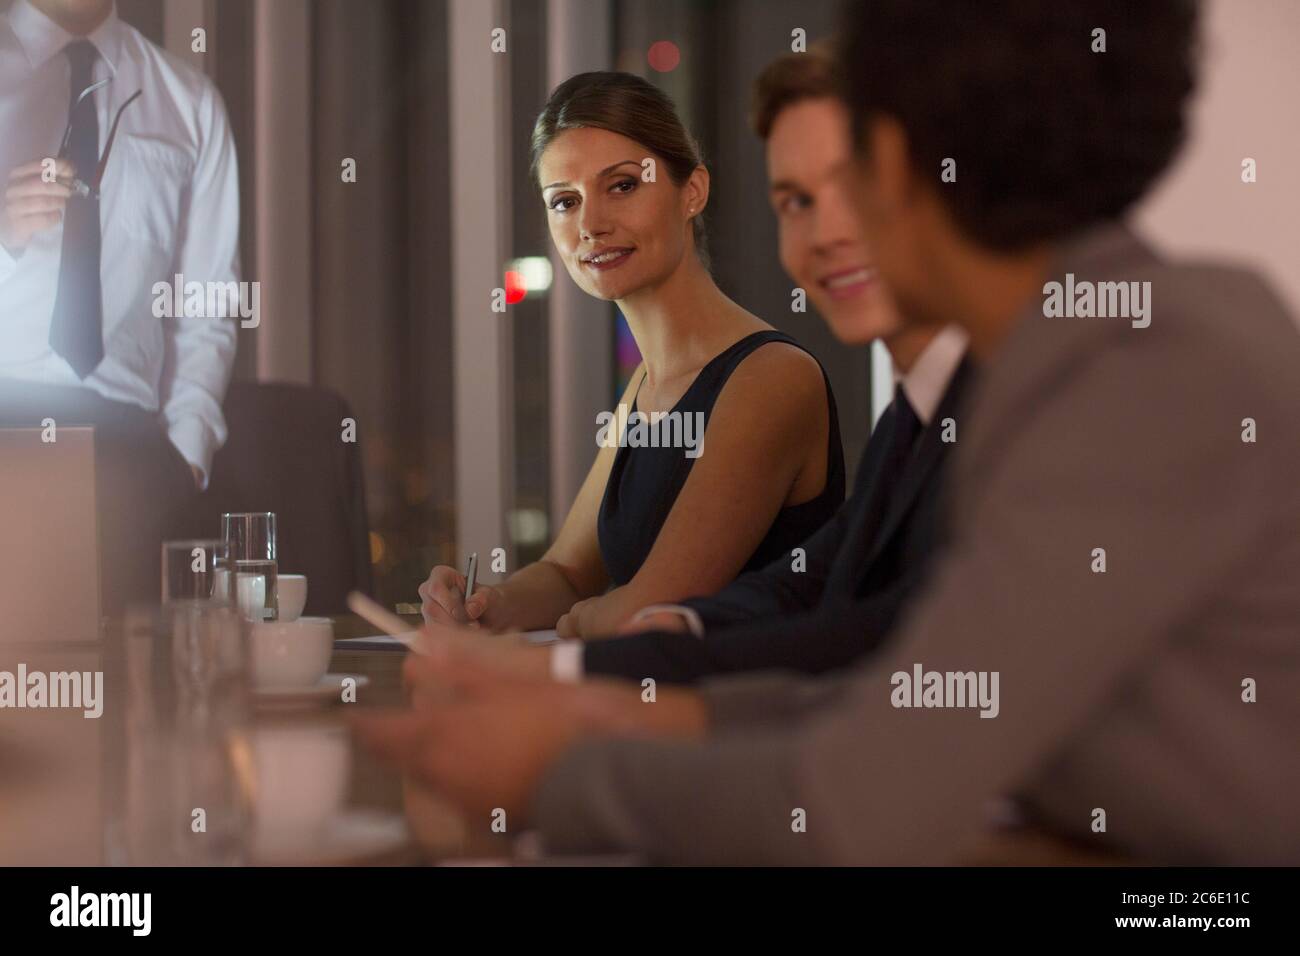 Business people meeting in conference room at night Stock Photo